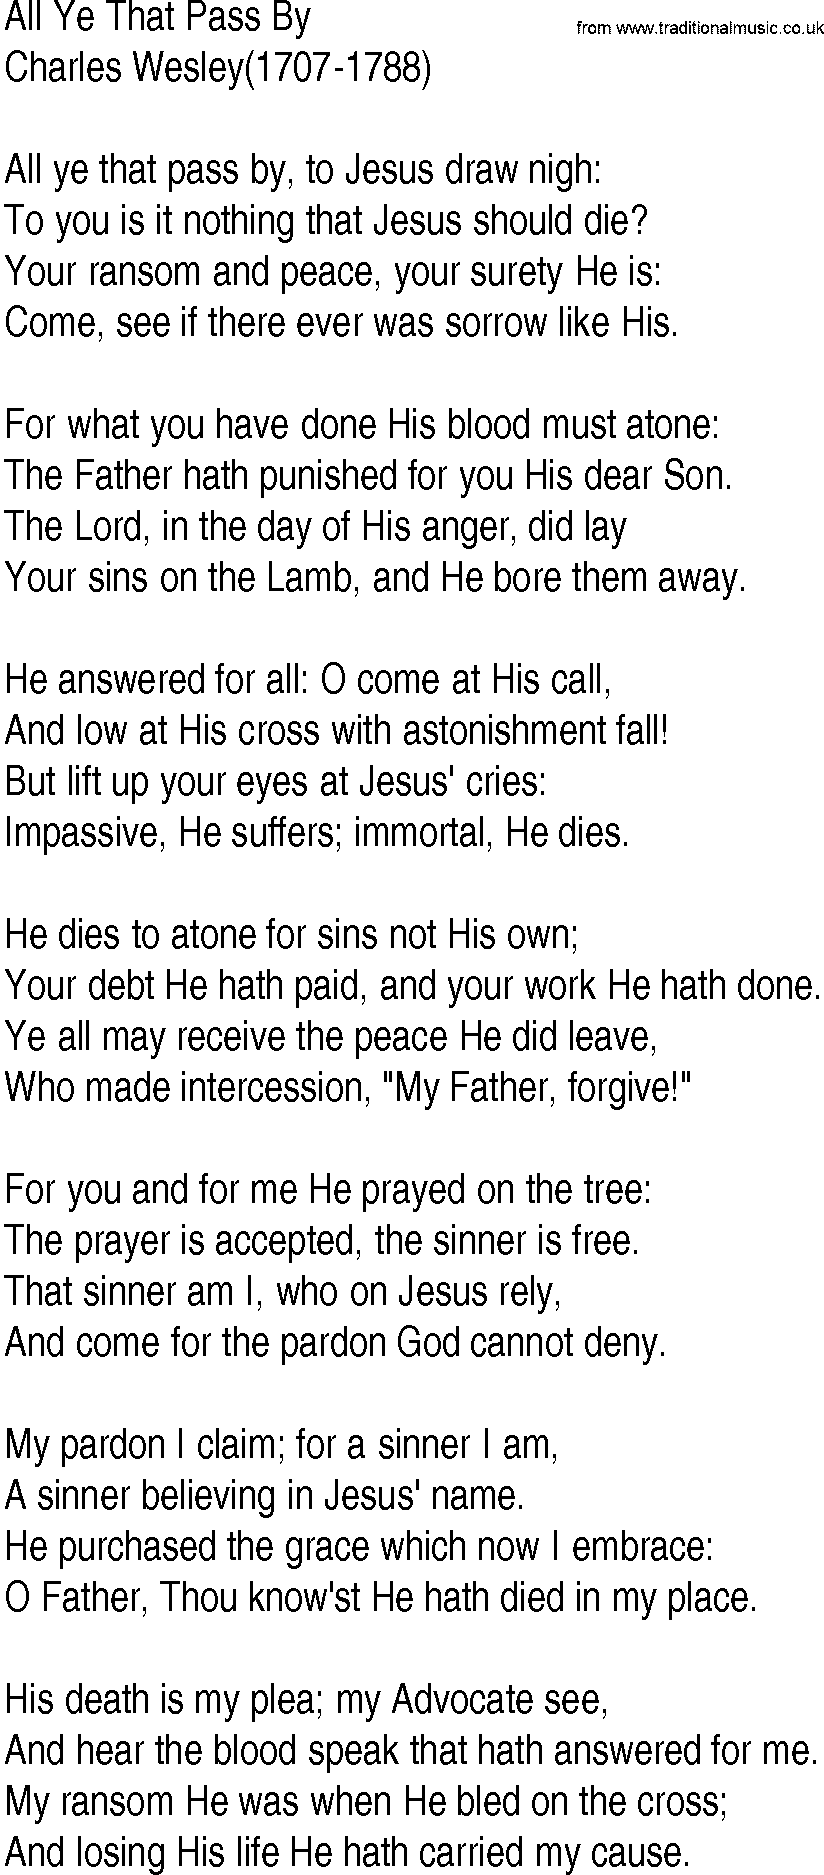 Hymn and Gospel Song: All Ye That Pass By by Charles Wesley lyrics